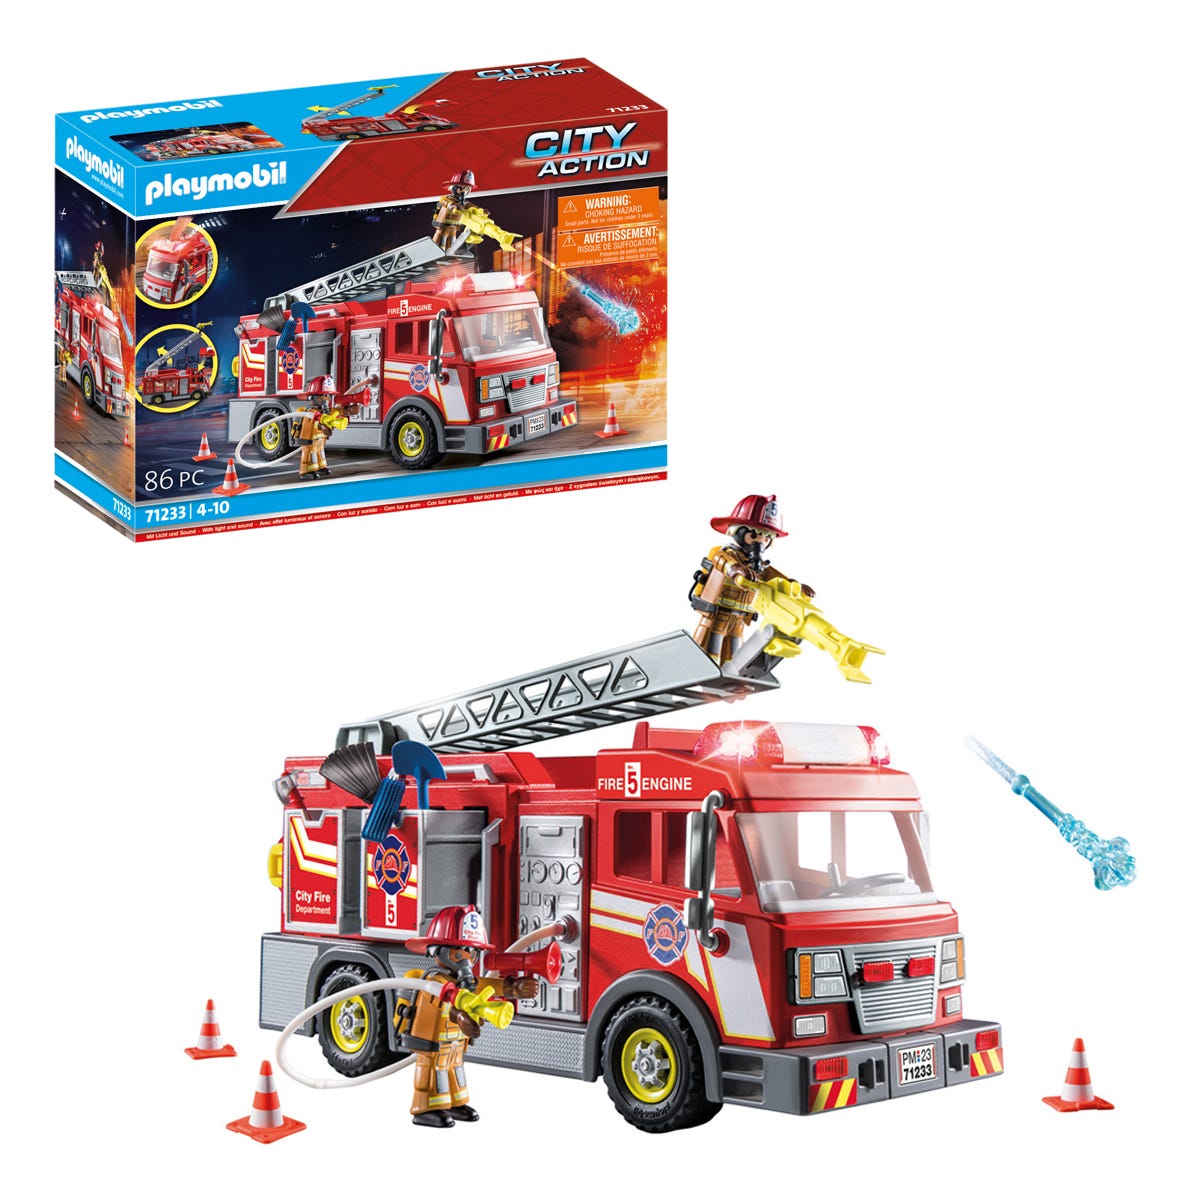 Playmobil 71233 City Action Rescue Fire Truck